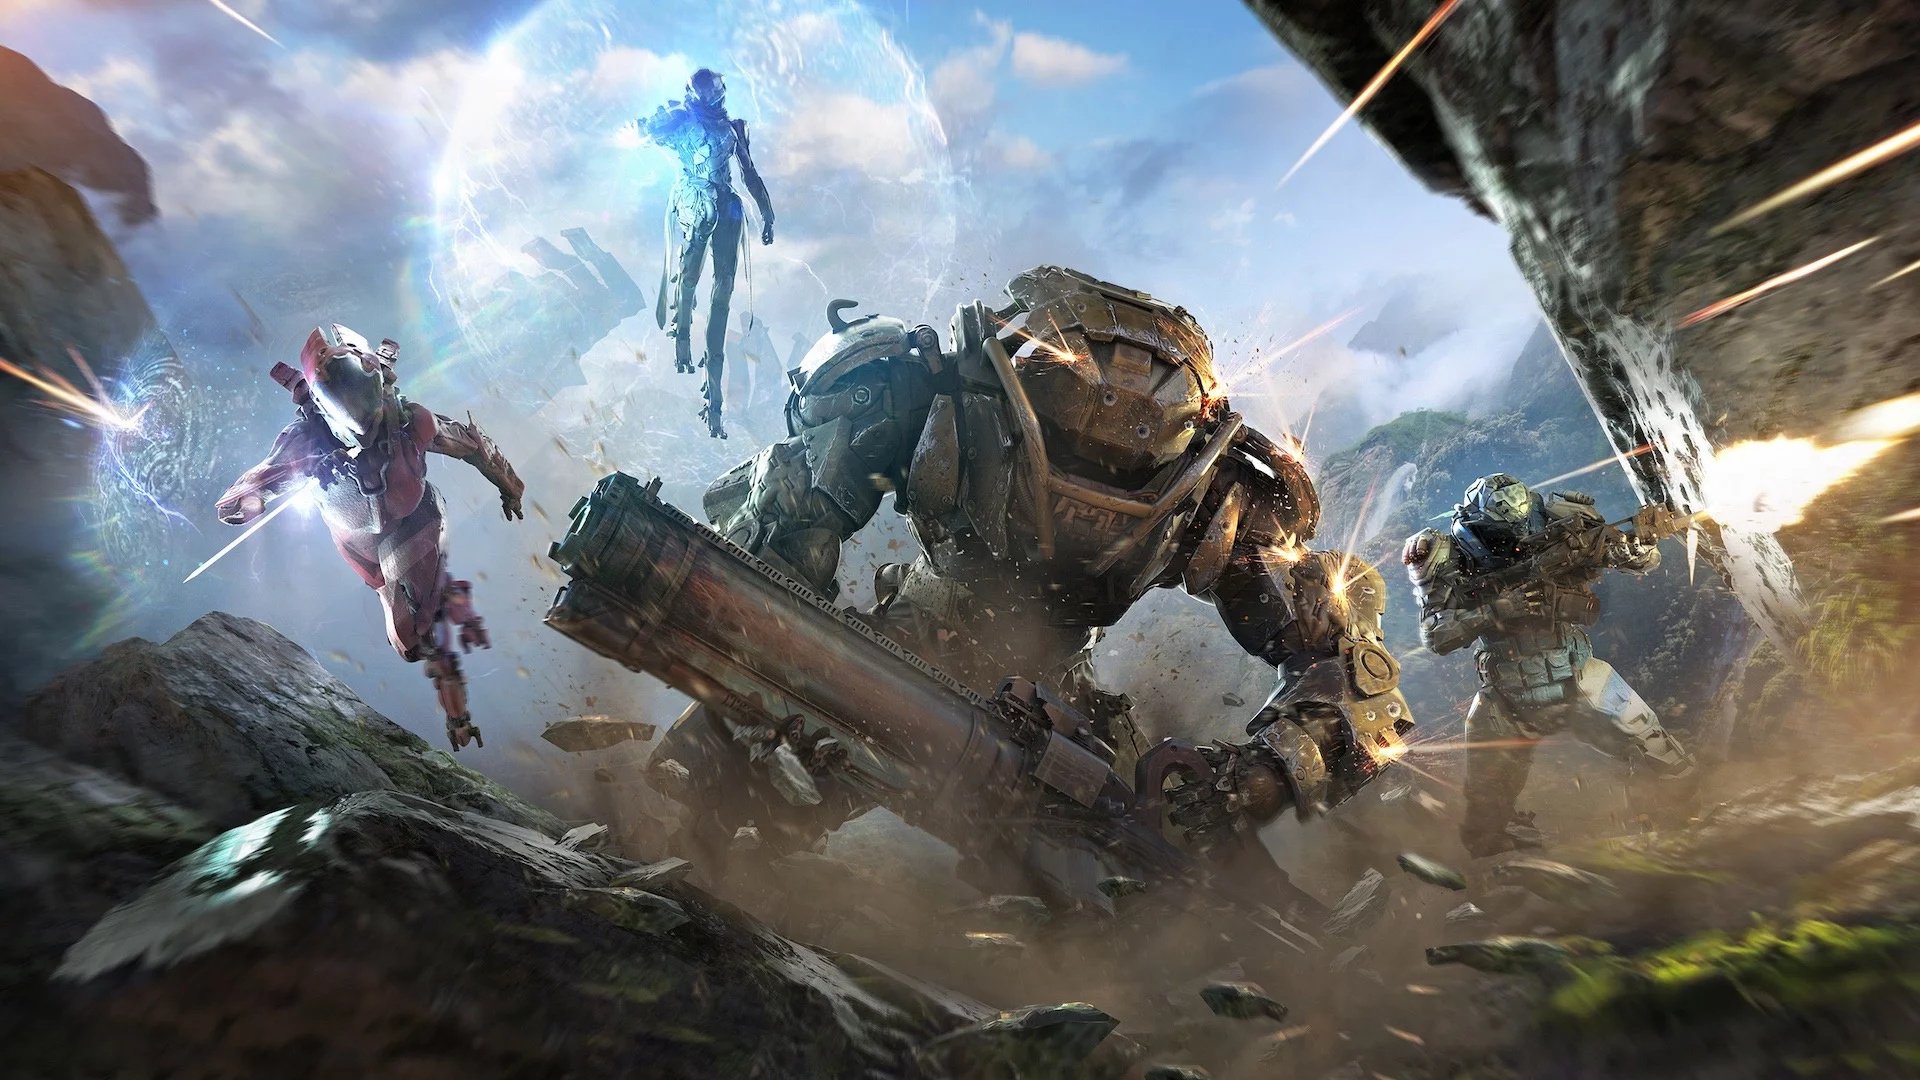 BioWare reportedly planning to revamp Anthem